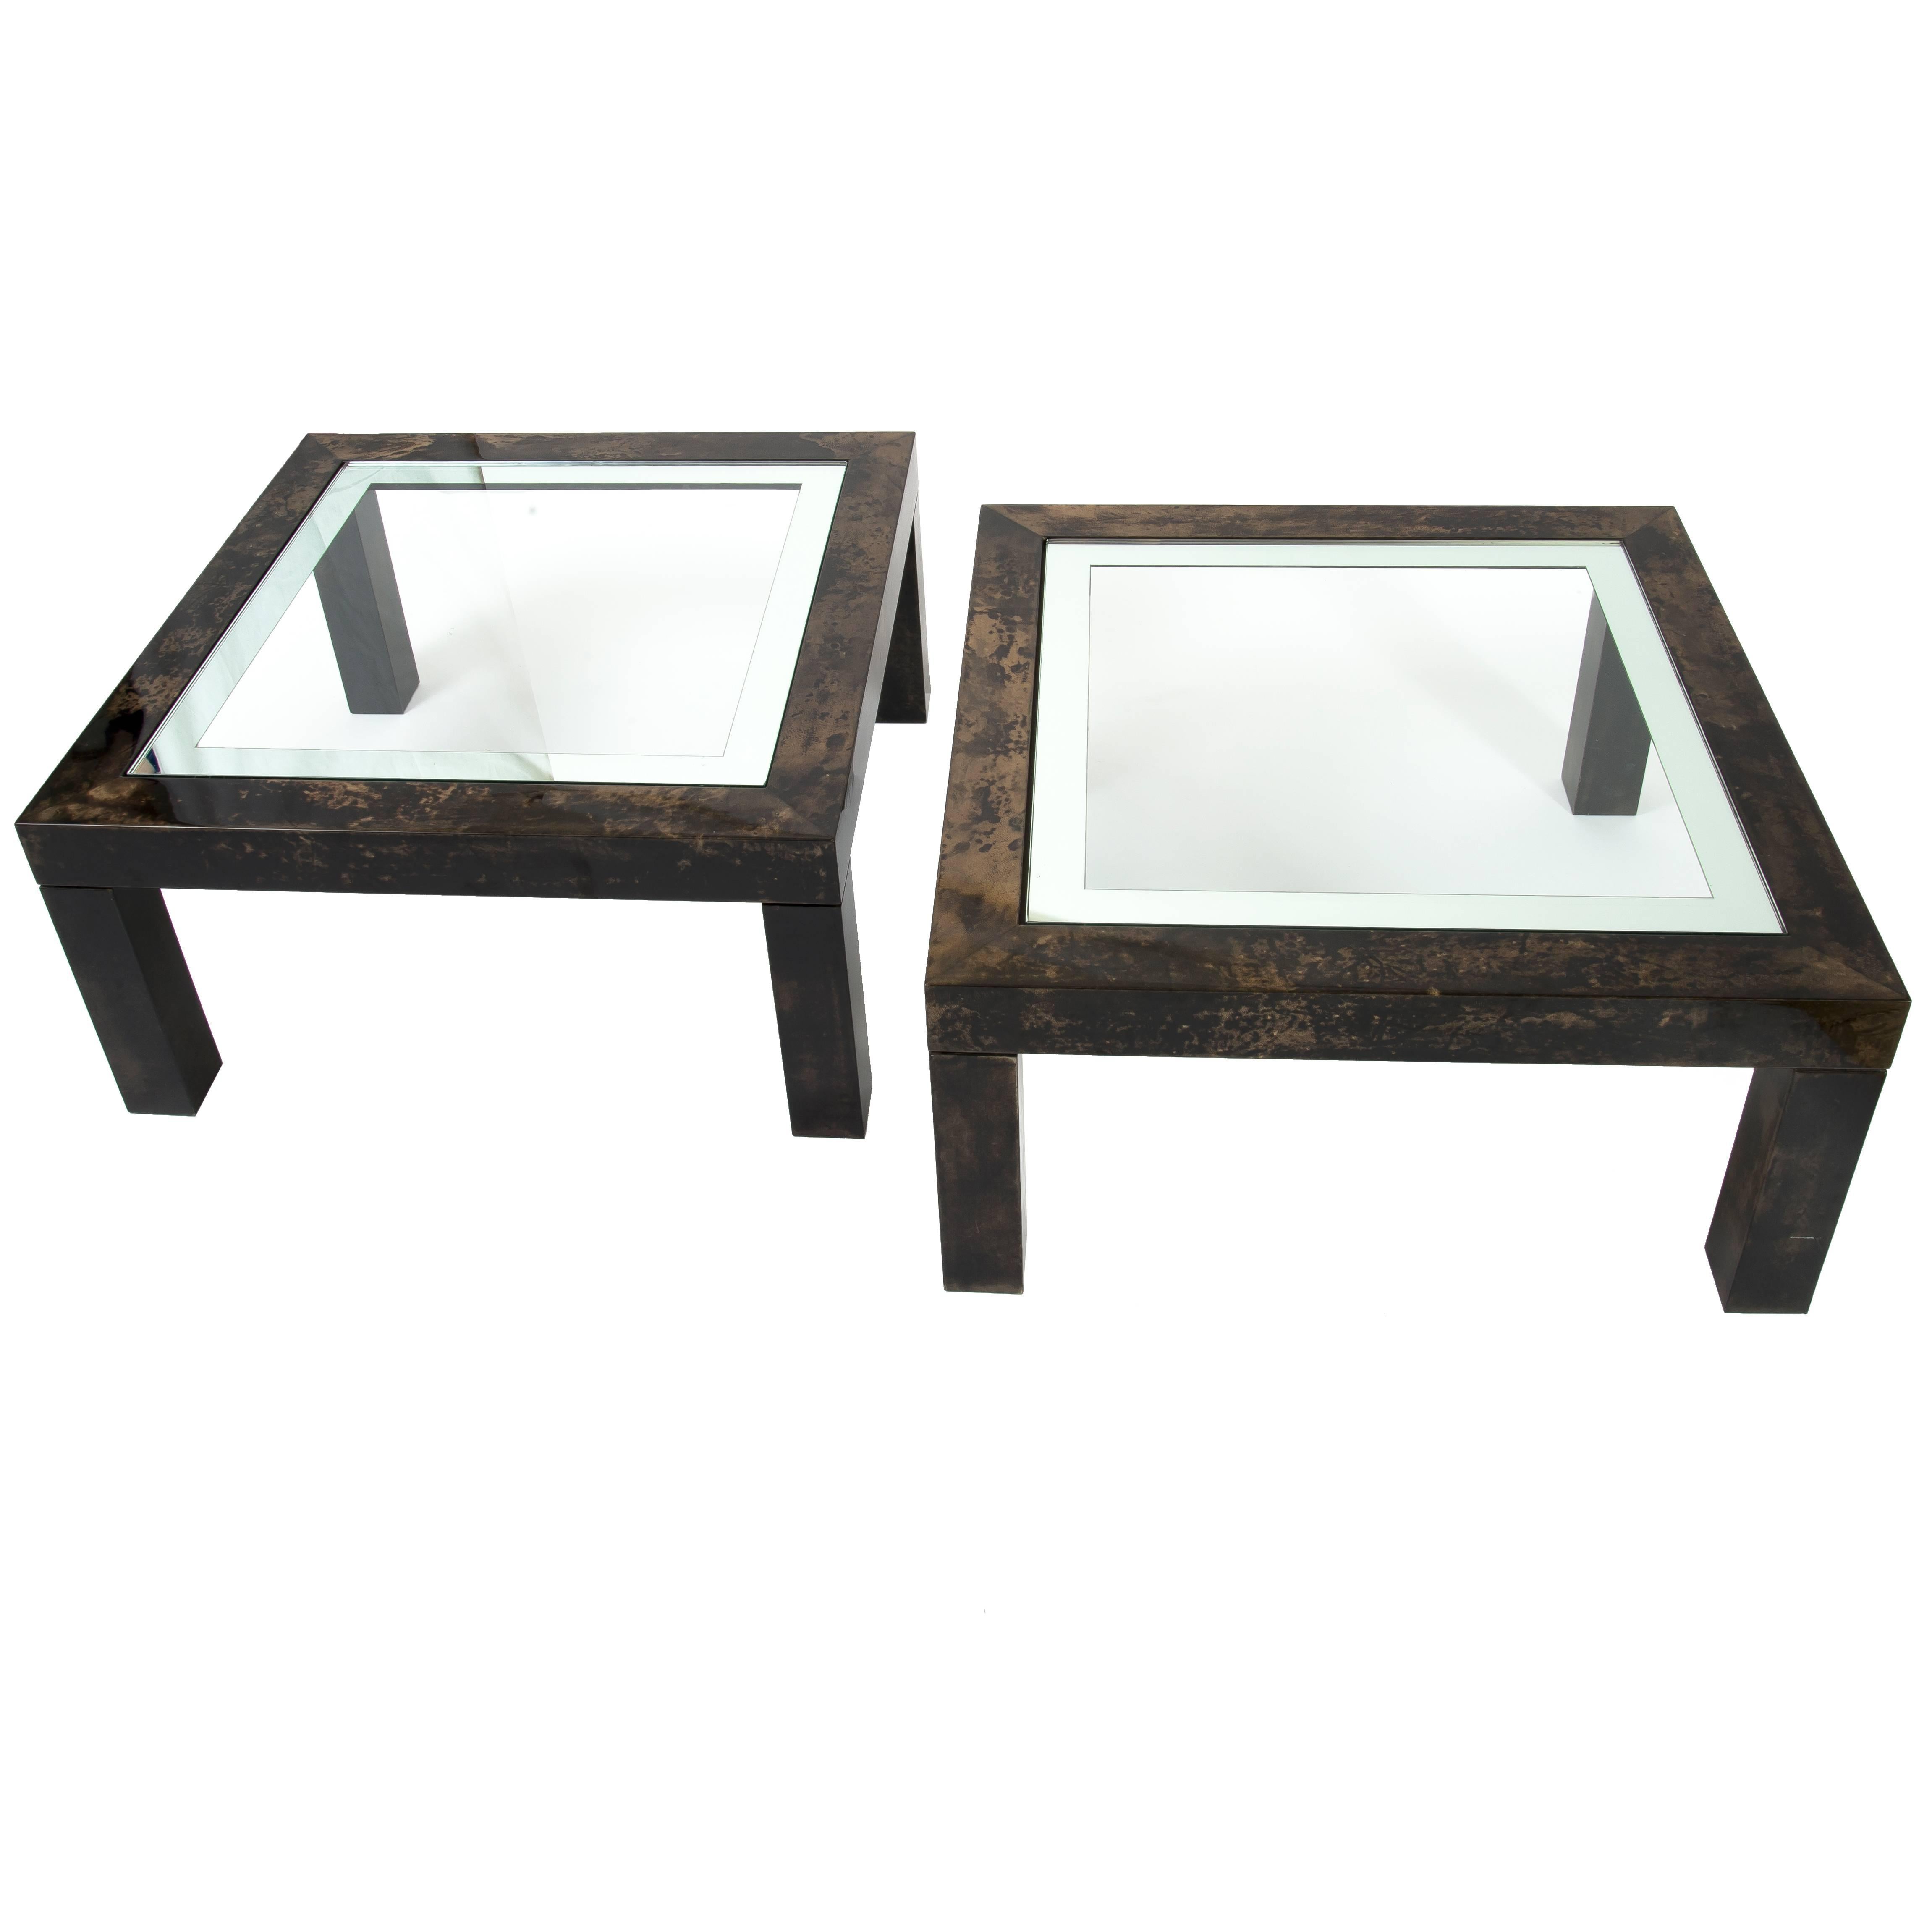 Aldo Tura, Pair of Low Tables For Sale